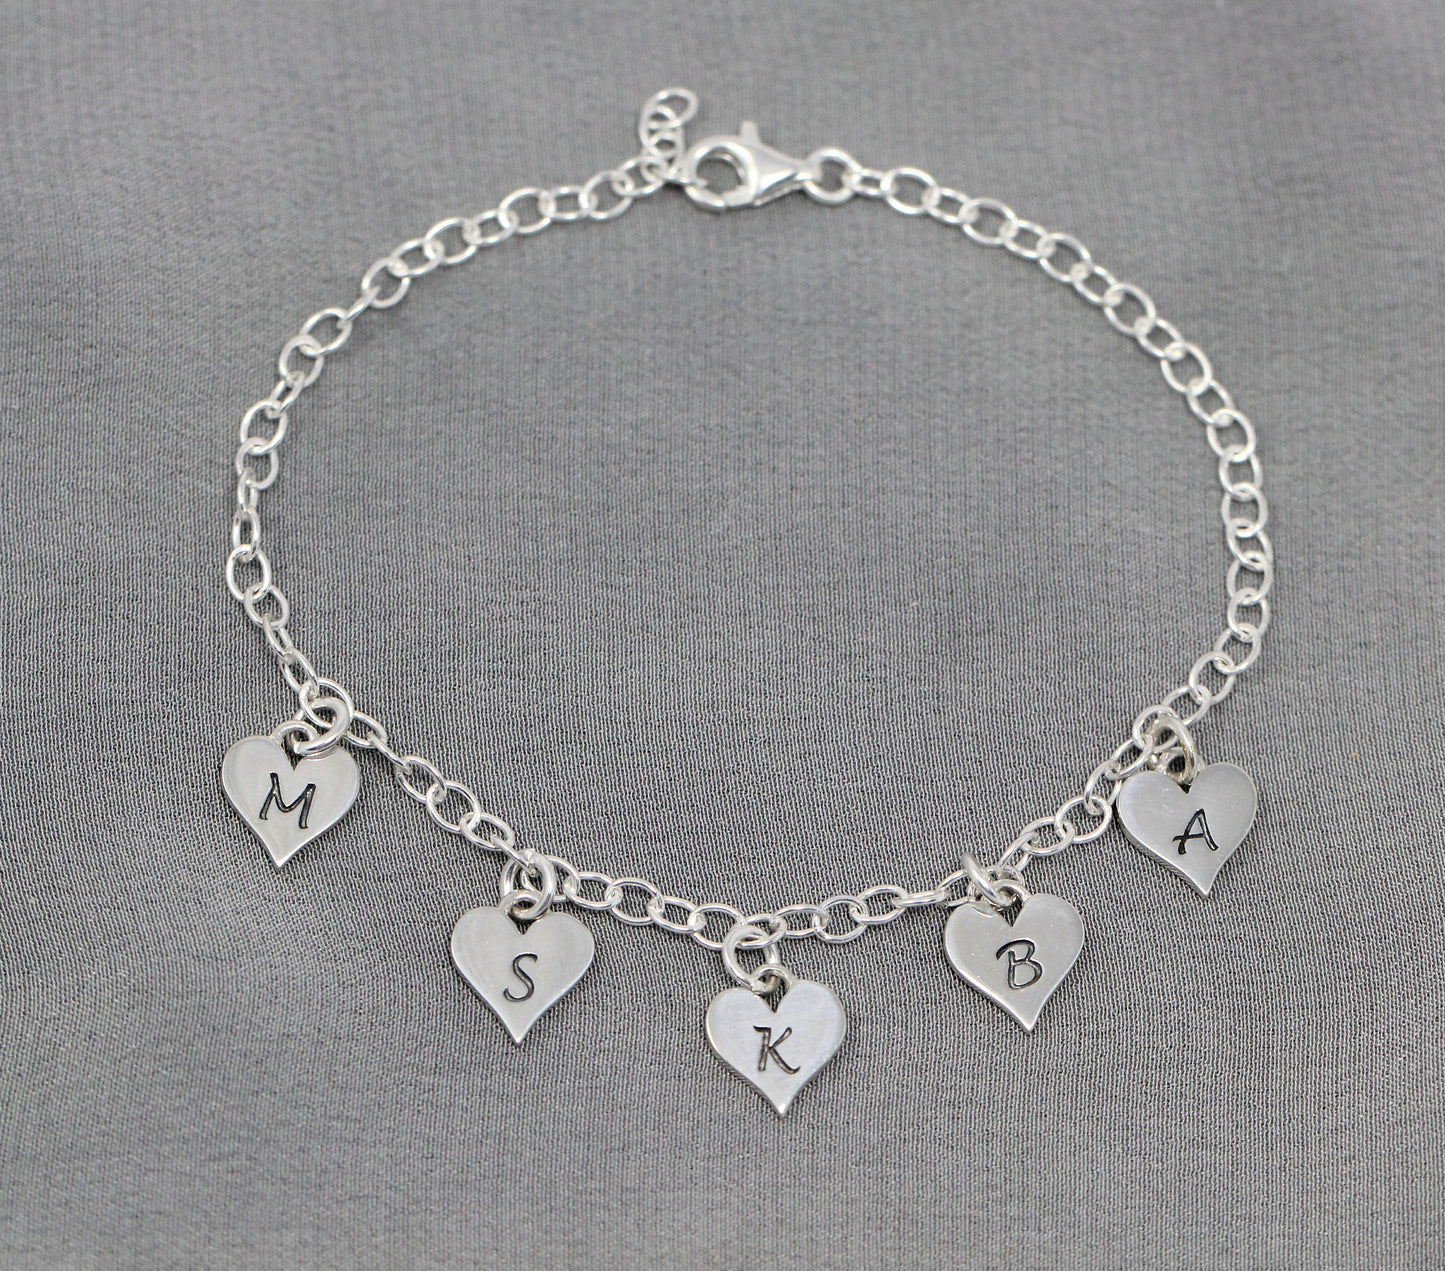 Grandmother bracelet with heart charms and initials